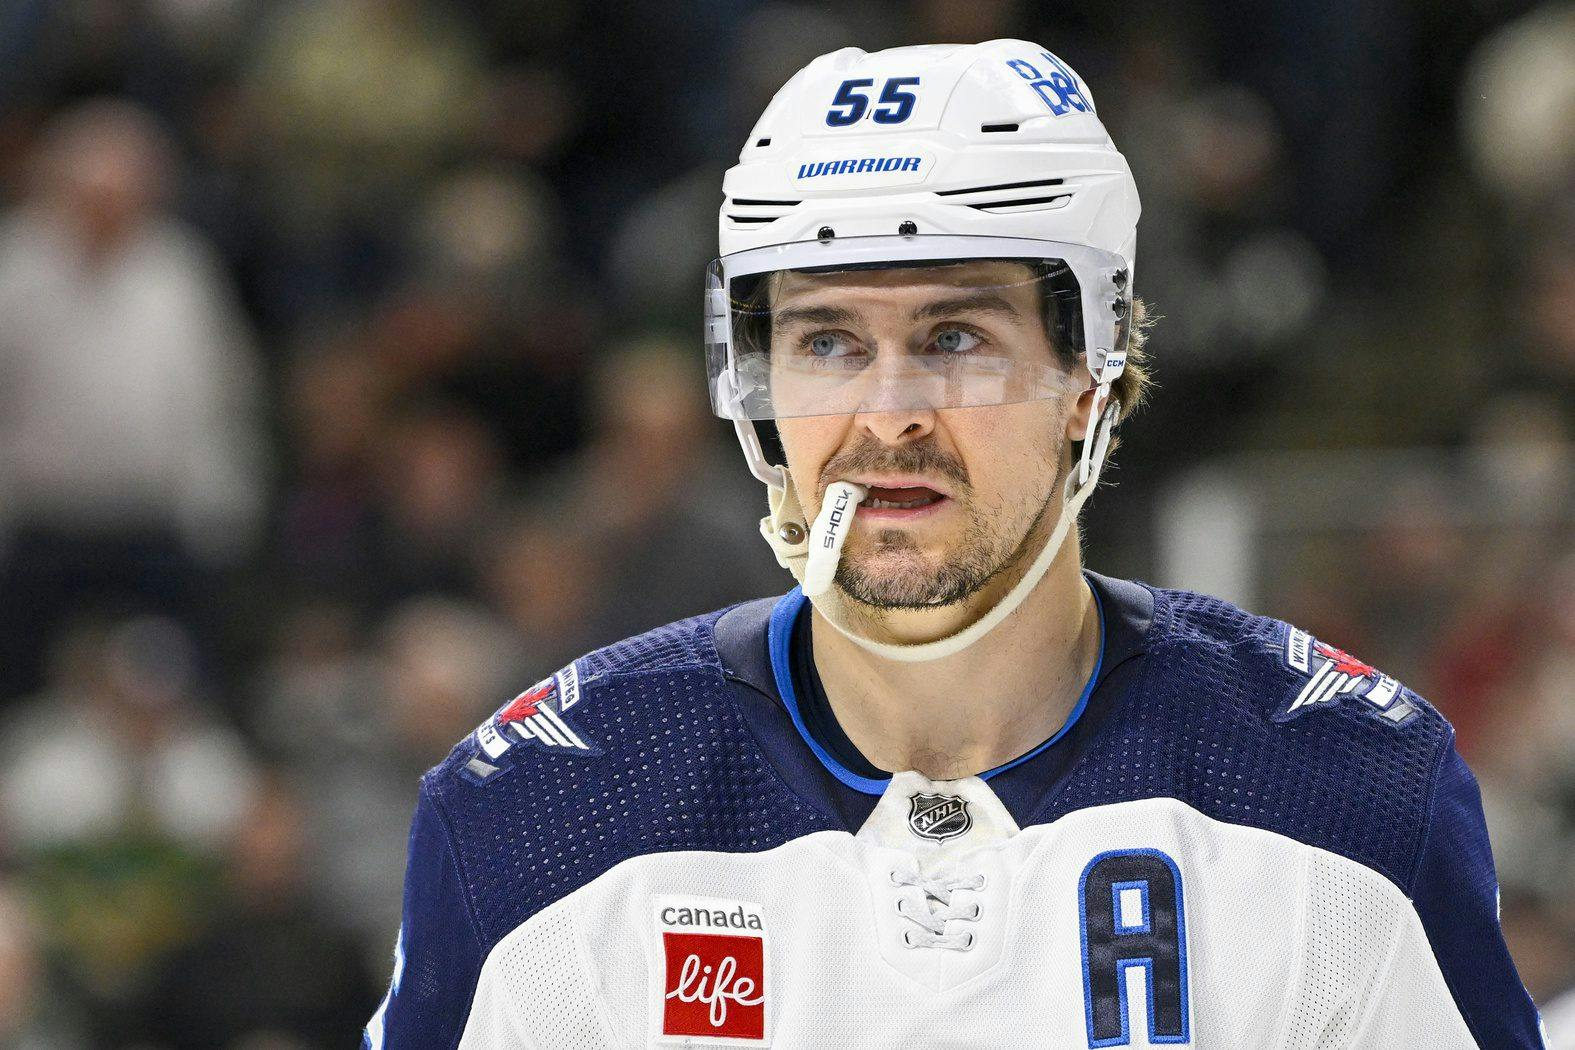 Winnipeg Jets’ Mark Scheifele out for Game 5, questionable for possible Game 6